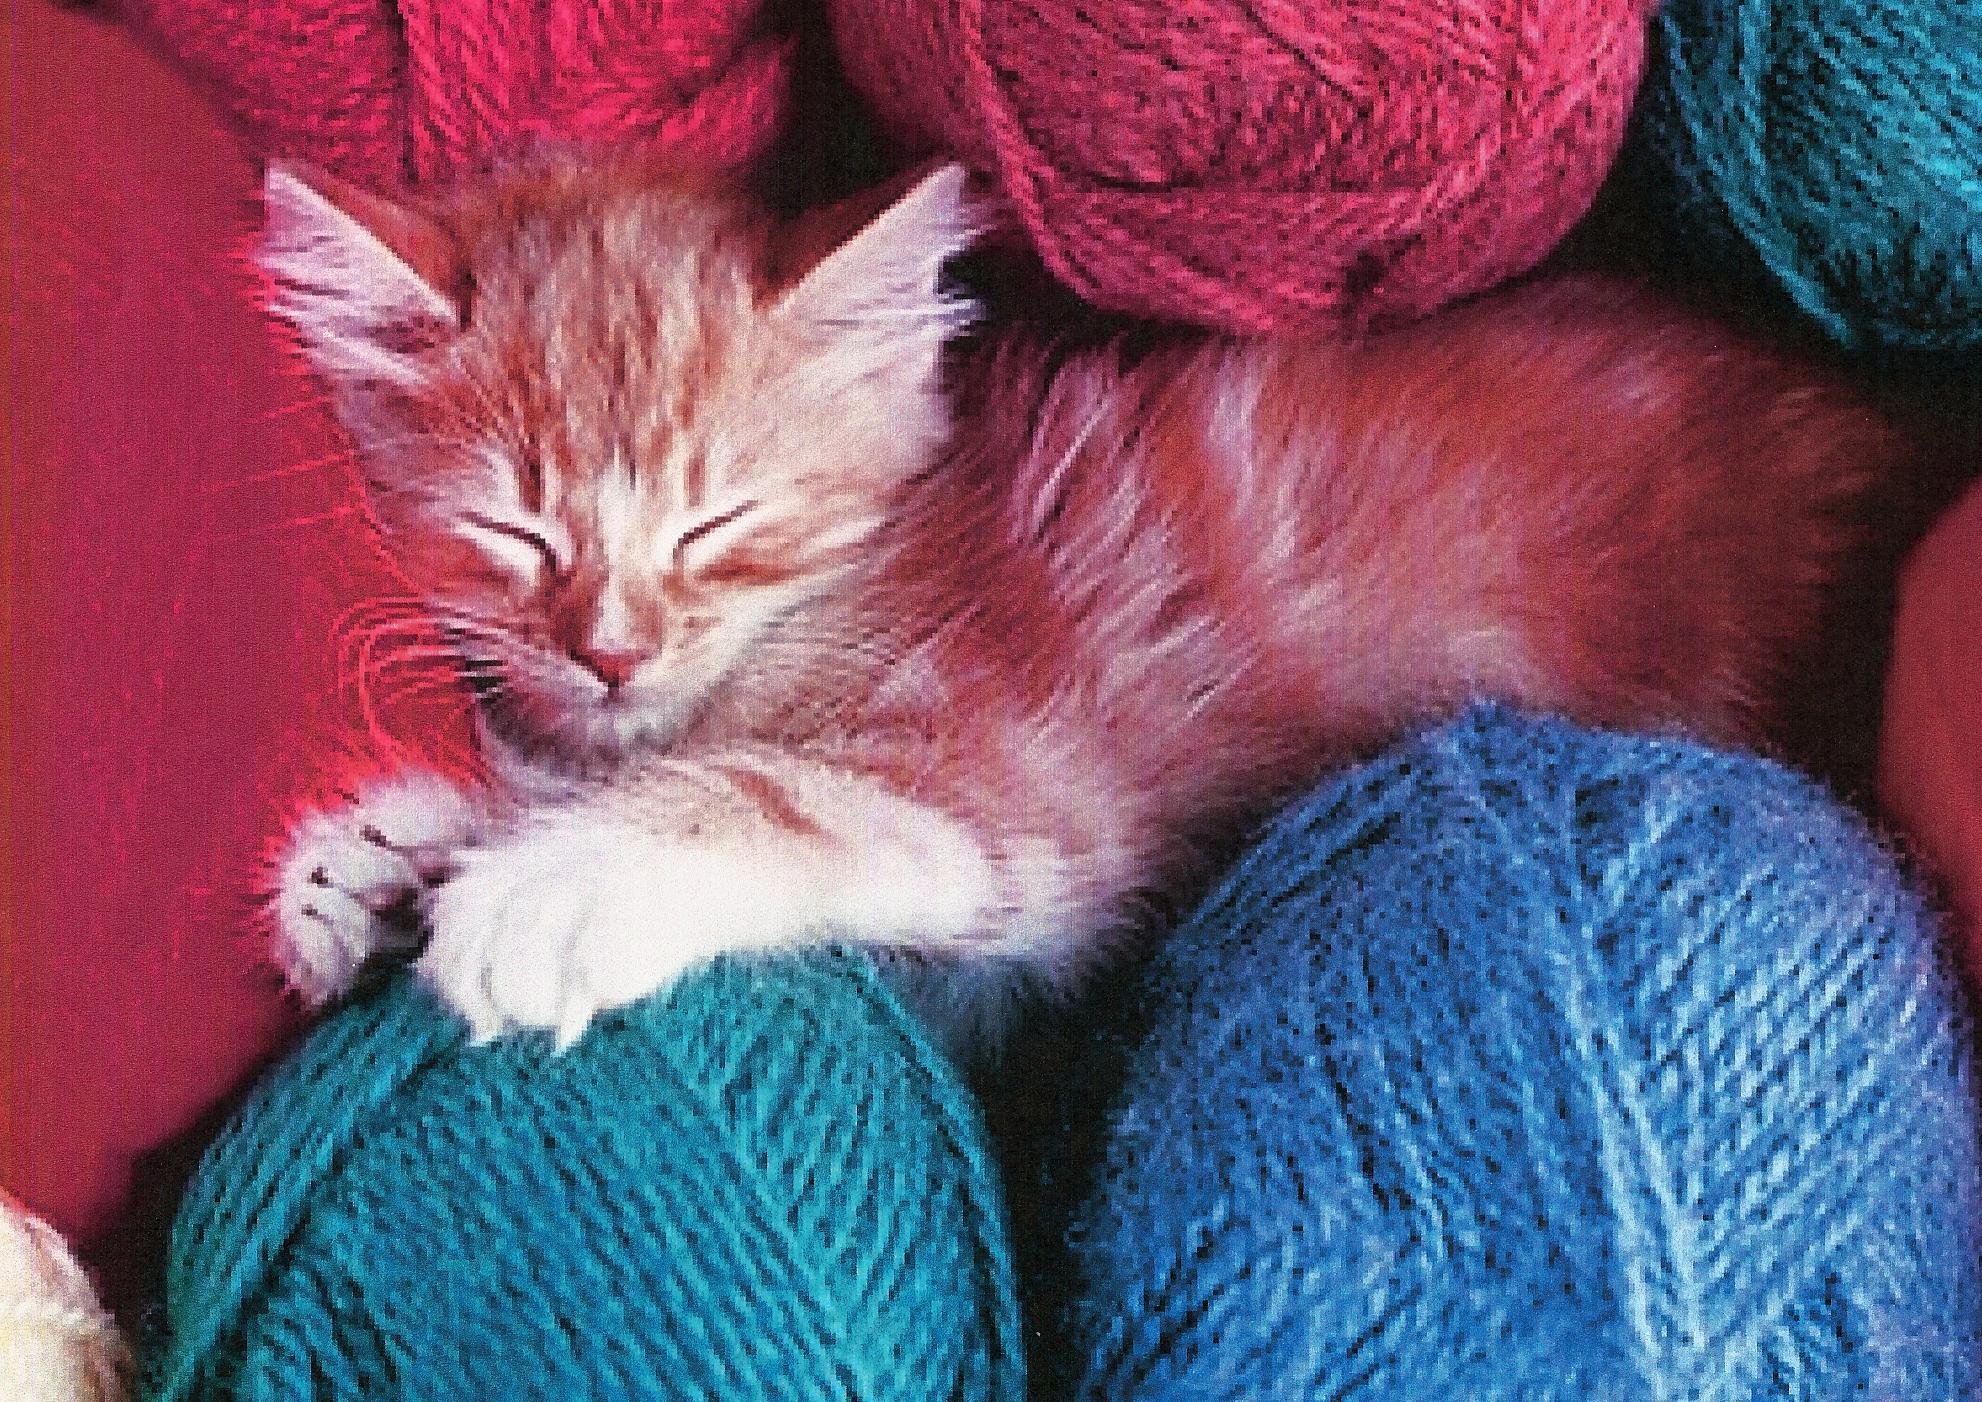 Kittens And Yarn Wallpaper High Quality